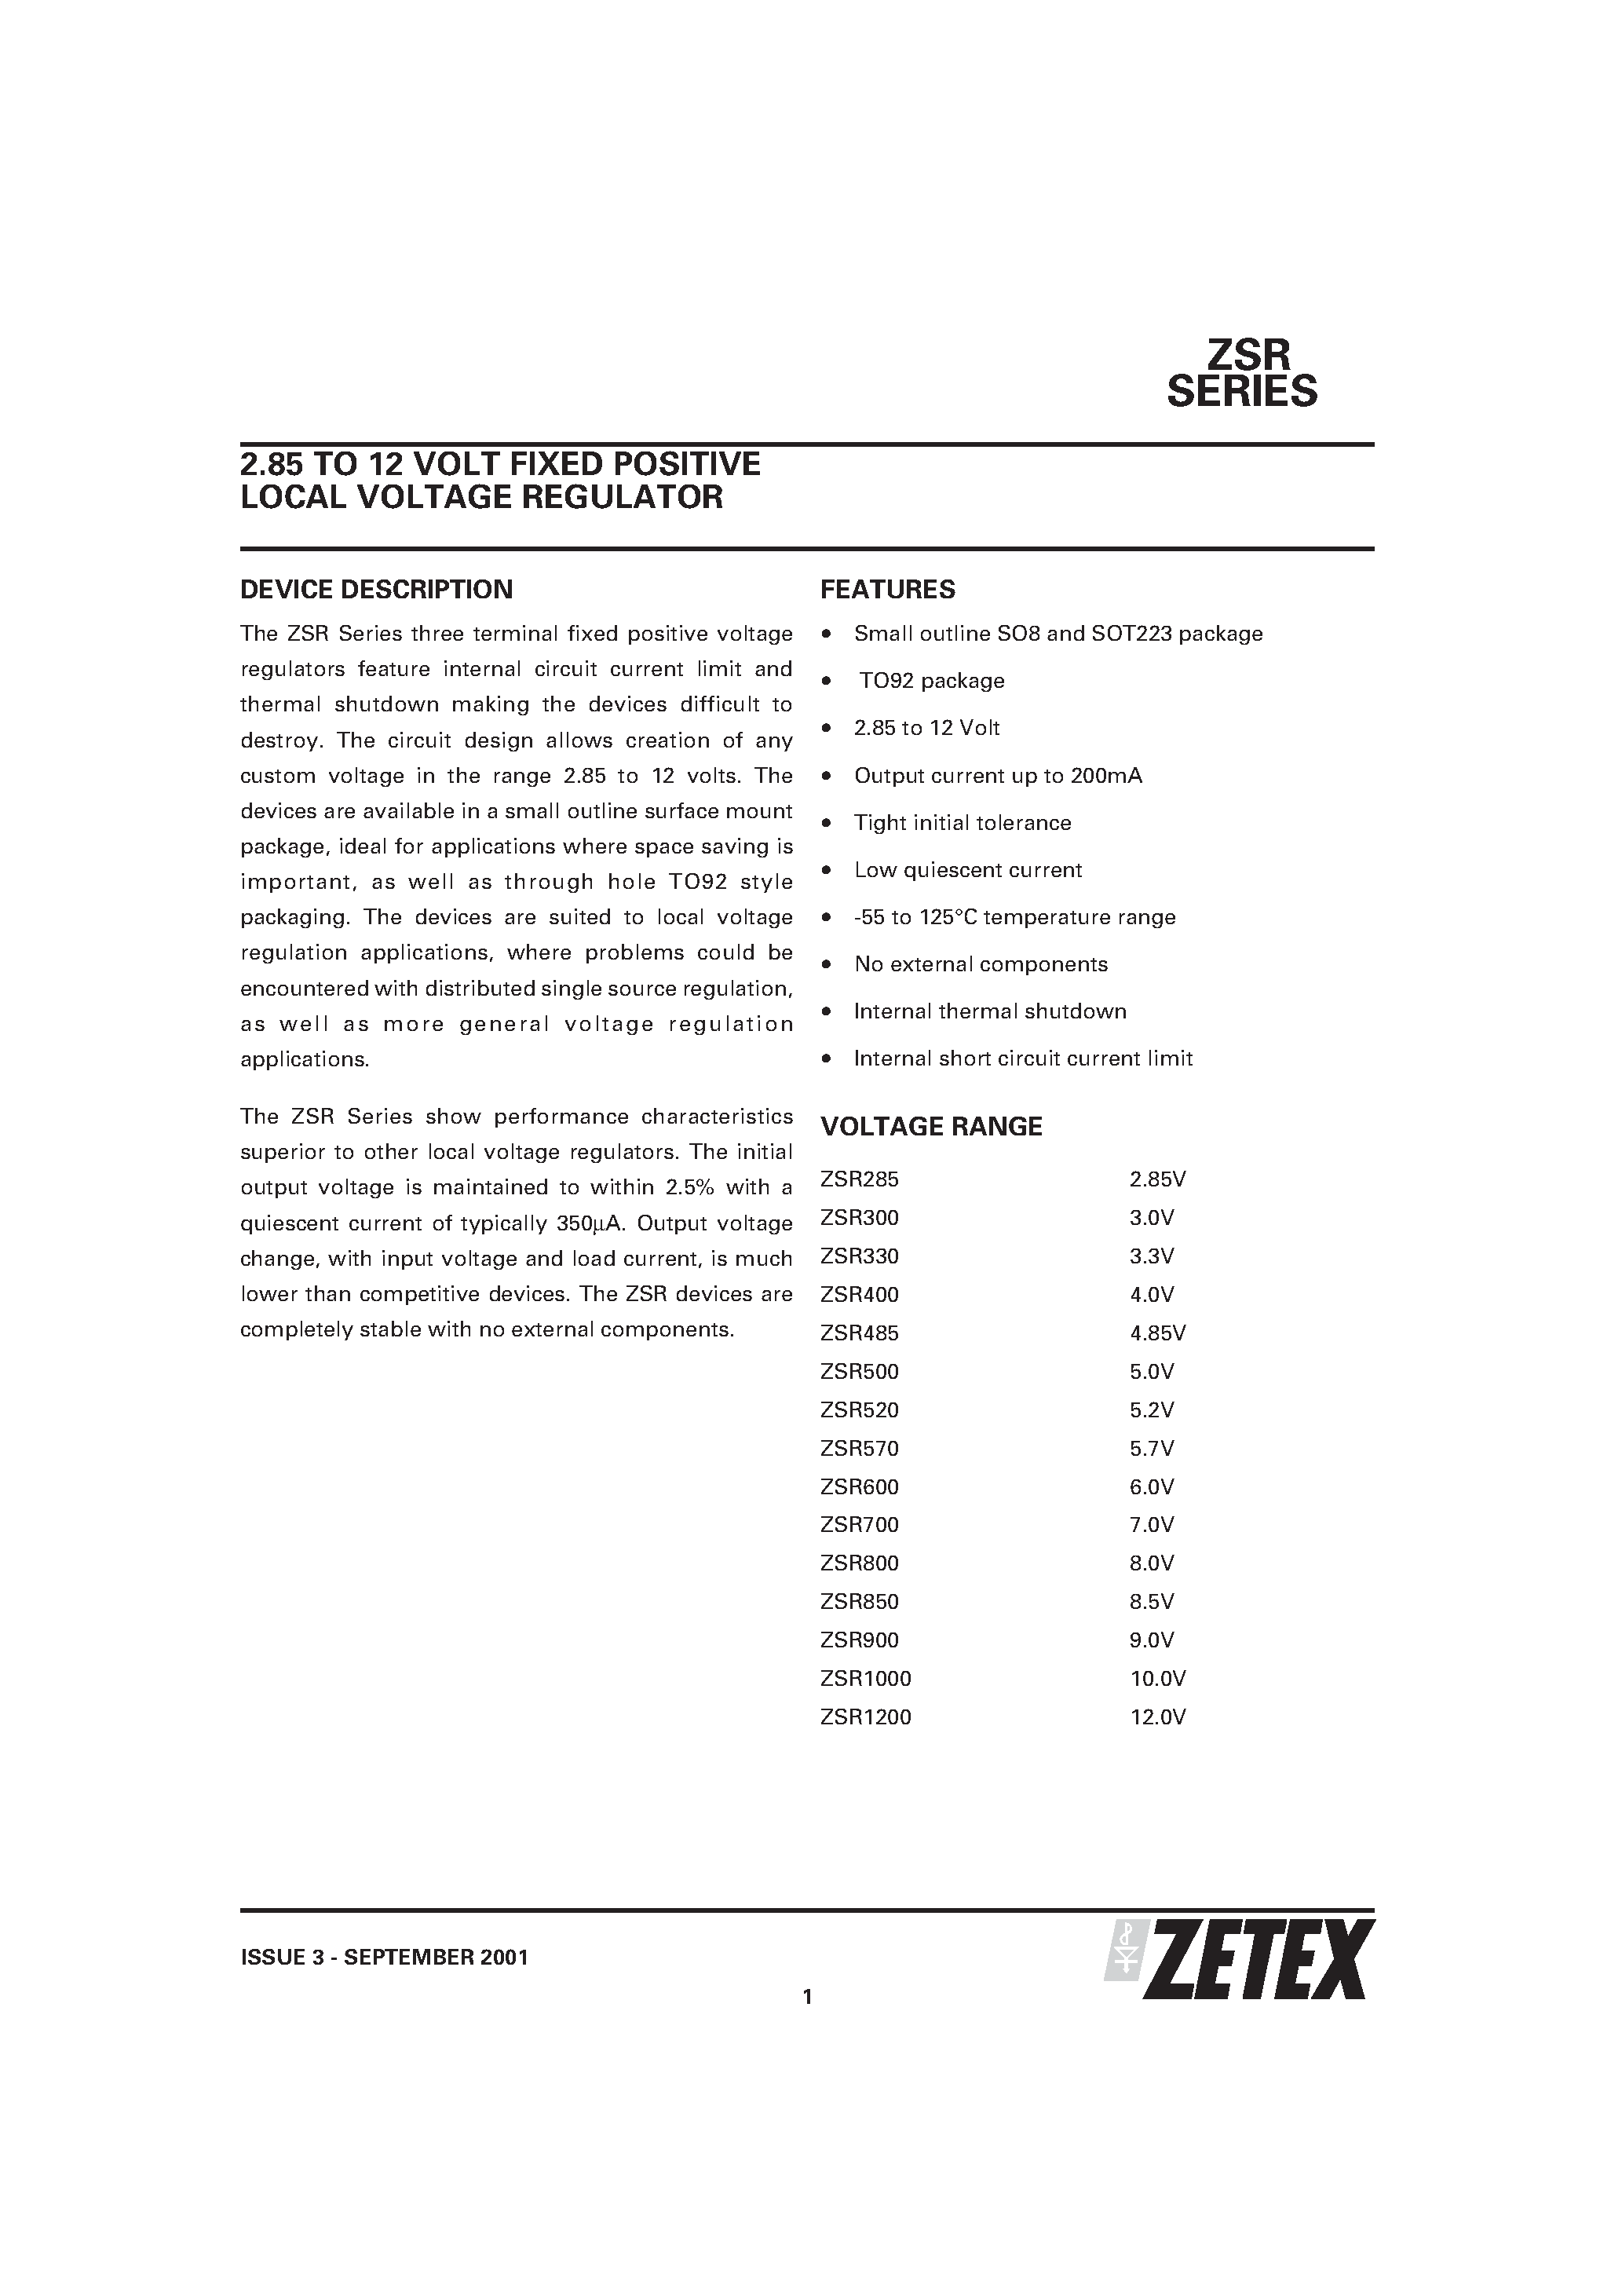 Datasheet ZSR285N8 - 2.85 TO 12 VOLT FIXED POSITIVE LOCAL VOLTAGE REGULATOR page 1